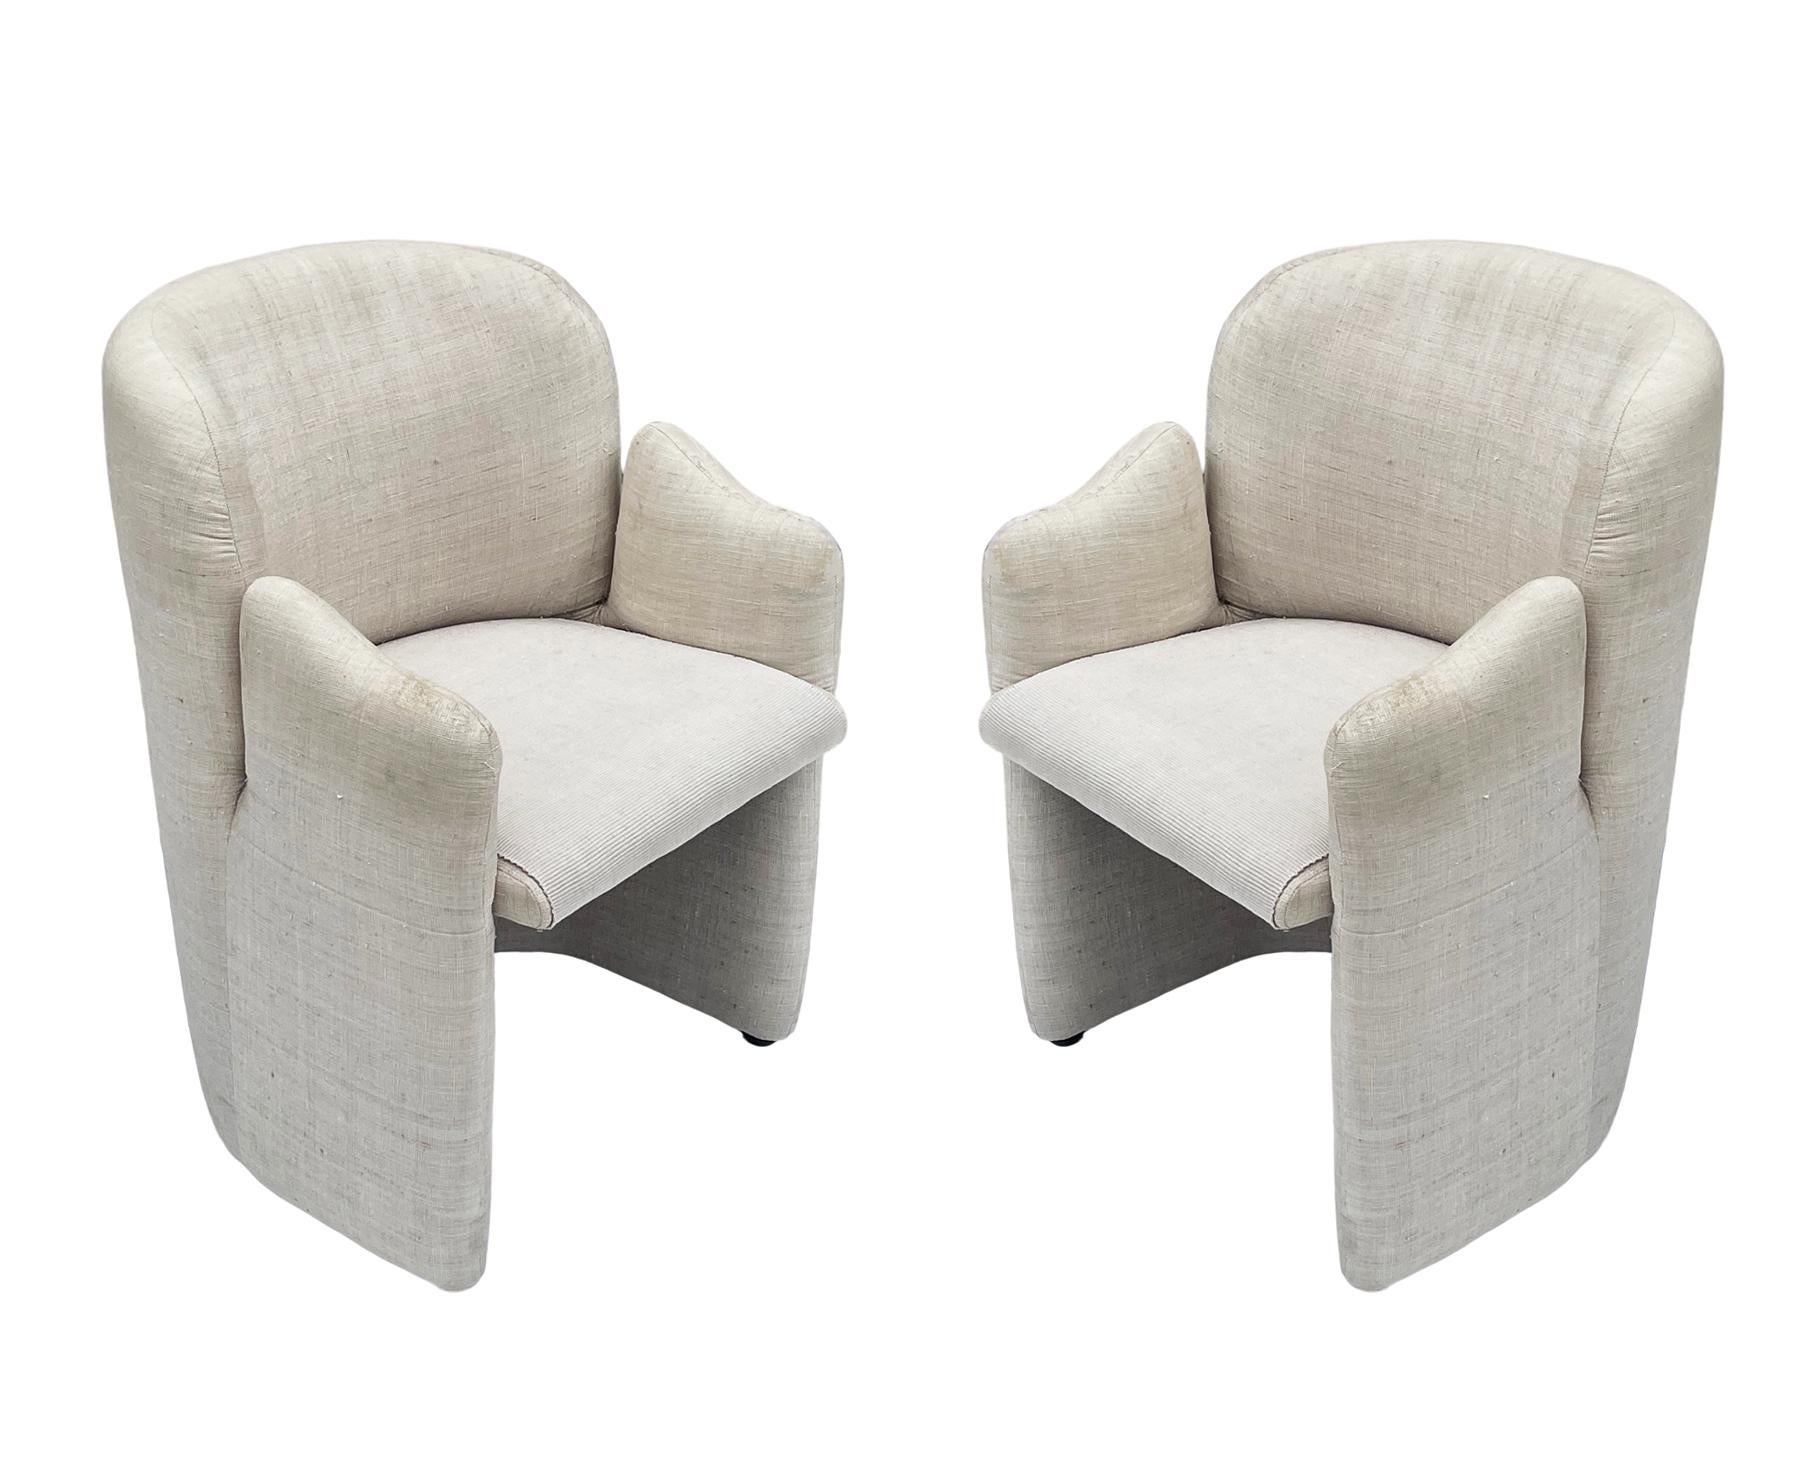 Late 20th Century Matching Pair of Mid-Century Modern Upholstered Armchairs or Lounge Chairs For Sale